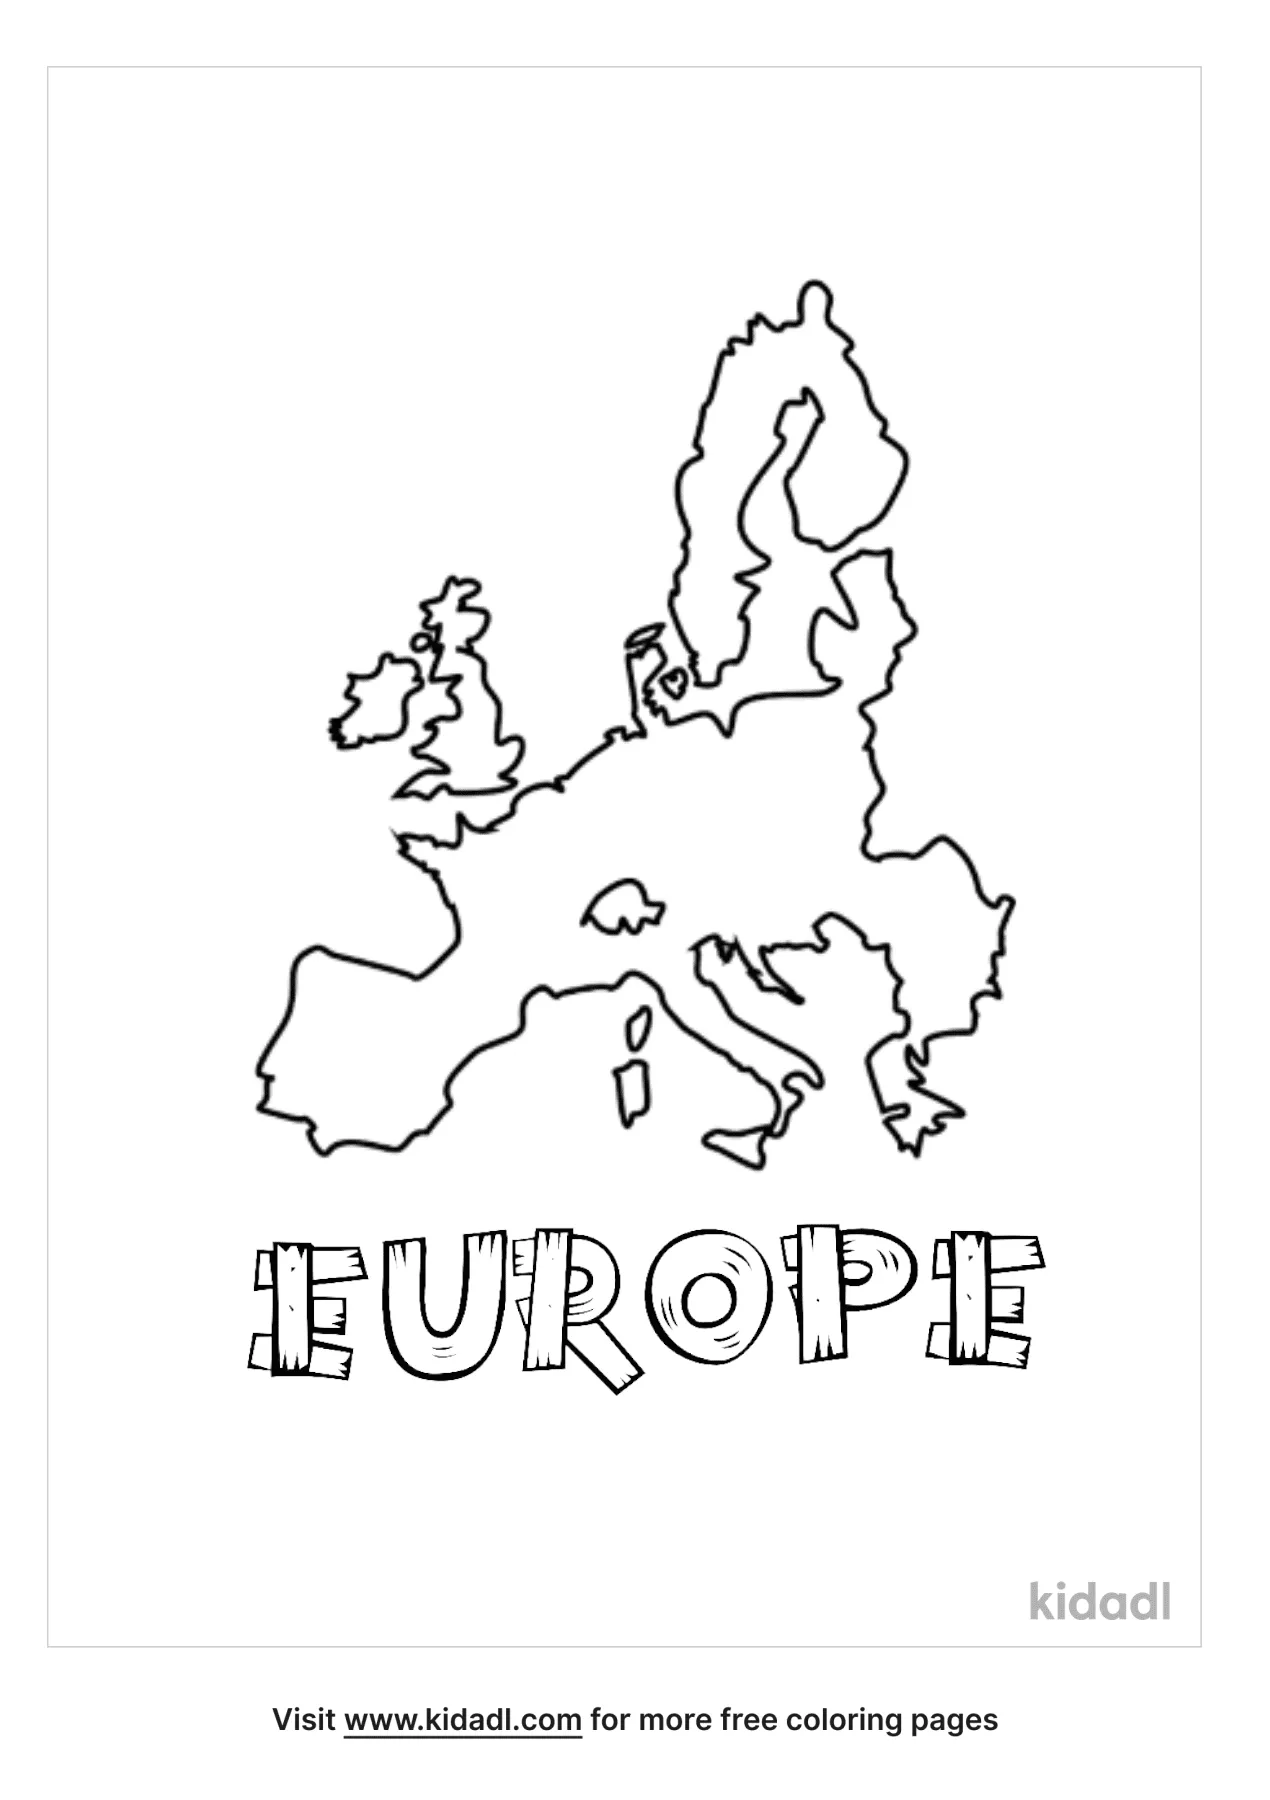 europe-printable-coloring-pages